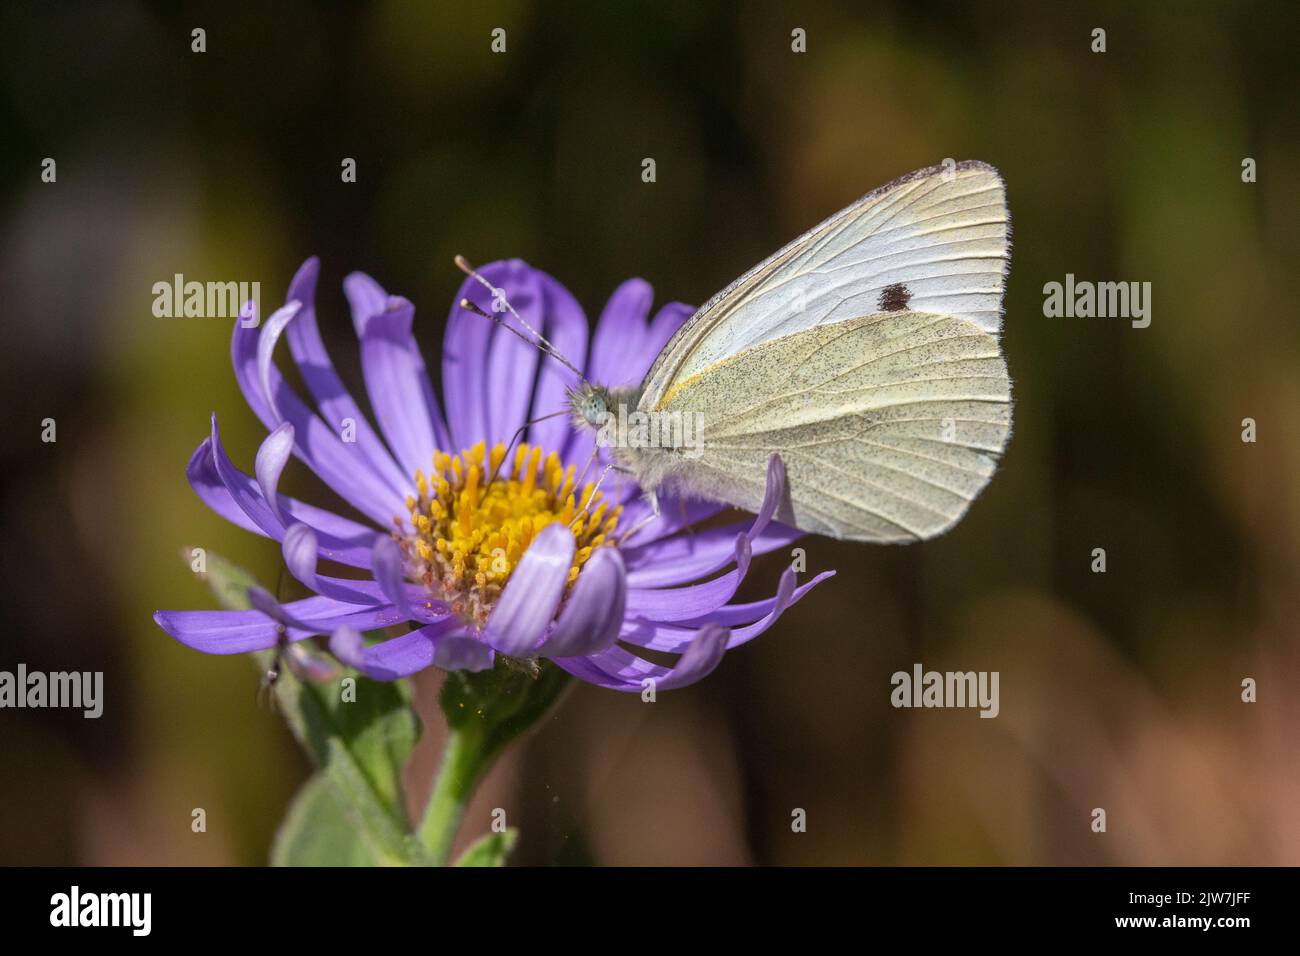 Close-up image of a Small White Butterfly (Pieris rapae) on Aster x frikartii 'Monch' Stock Photo